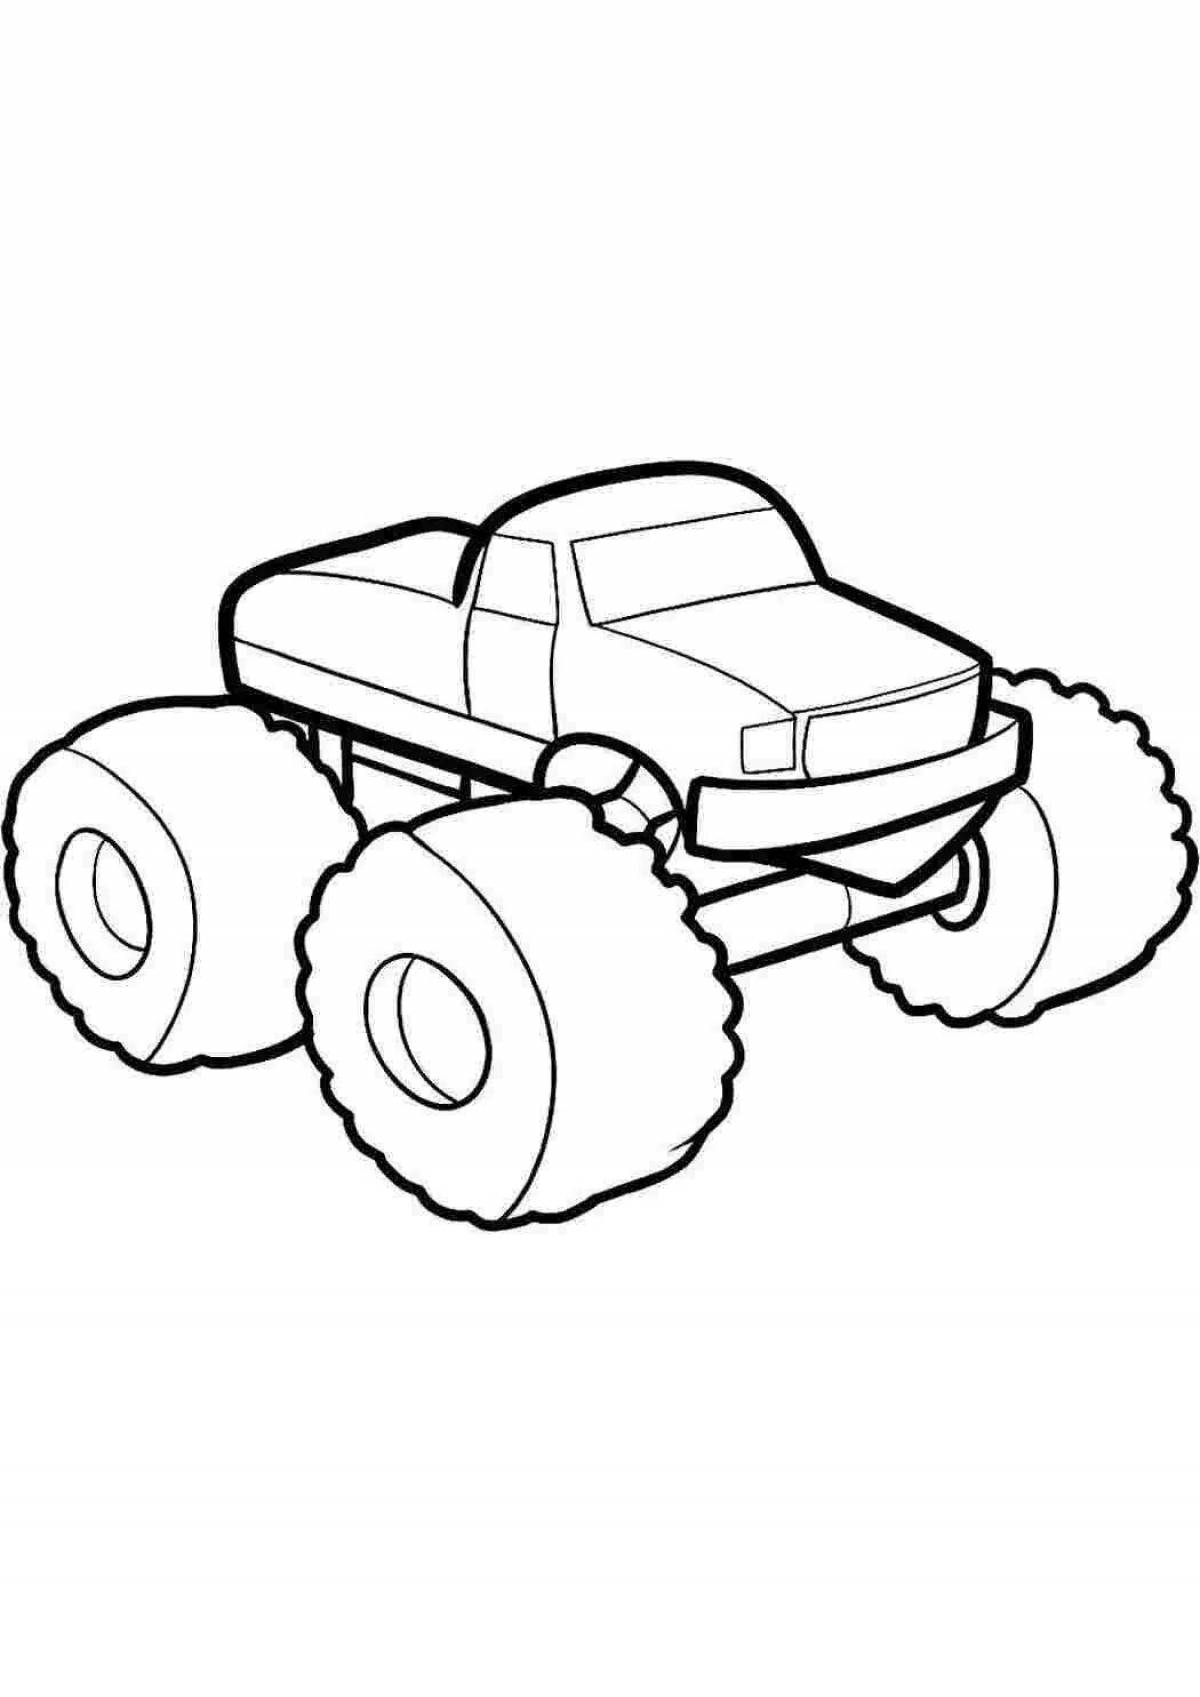 Adorable monster truck coloring book for kids